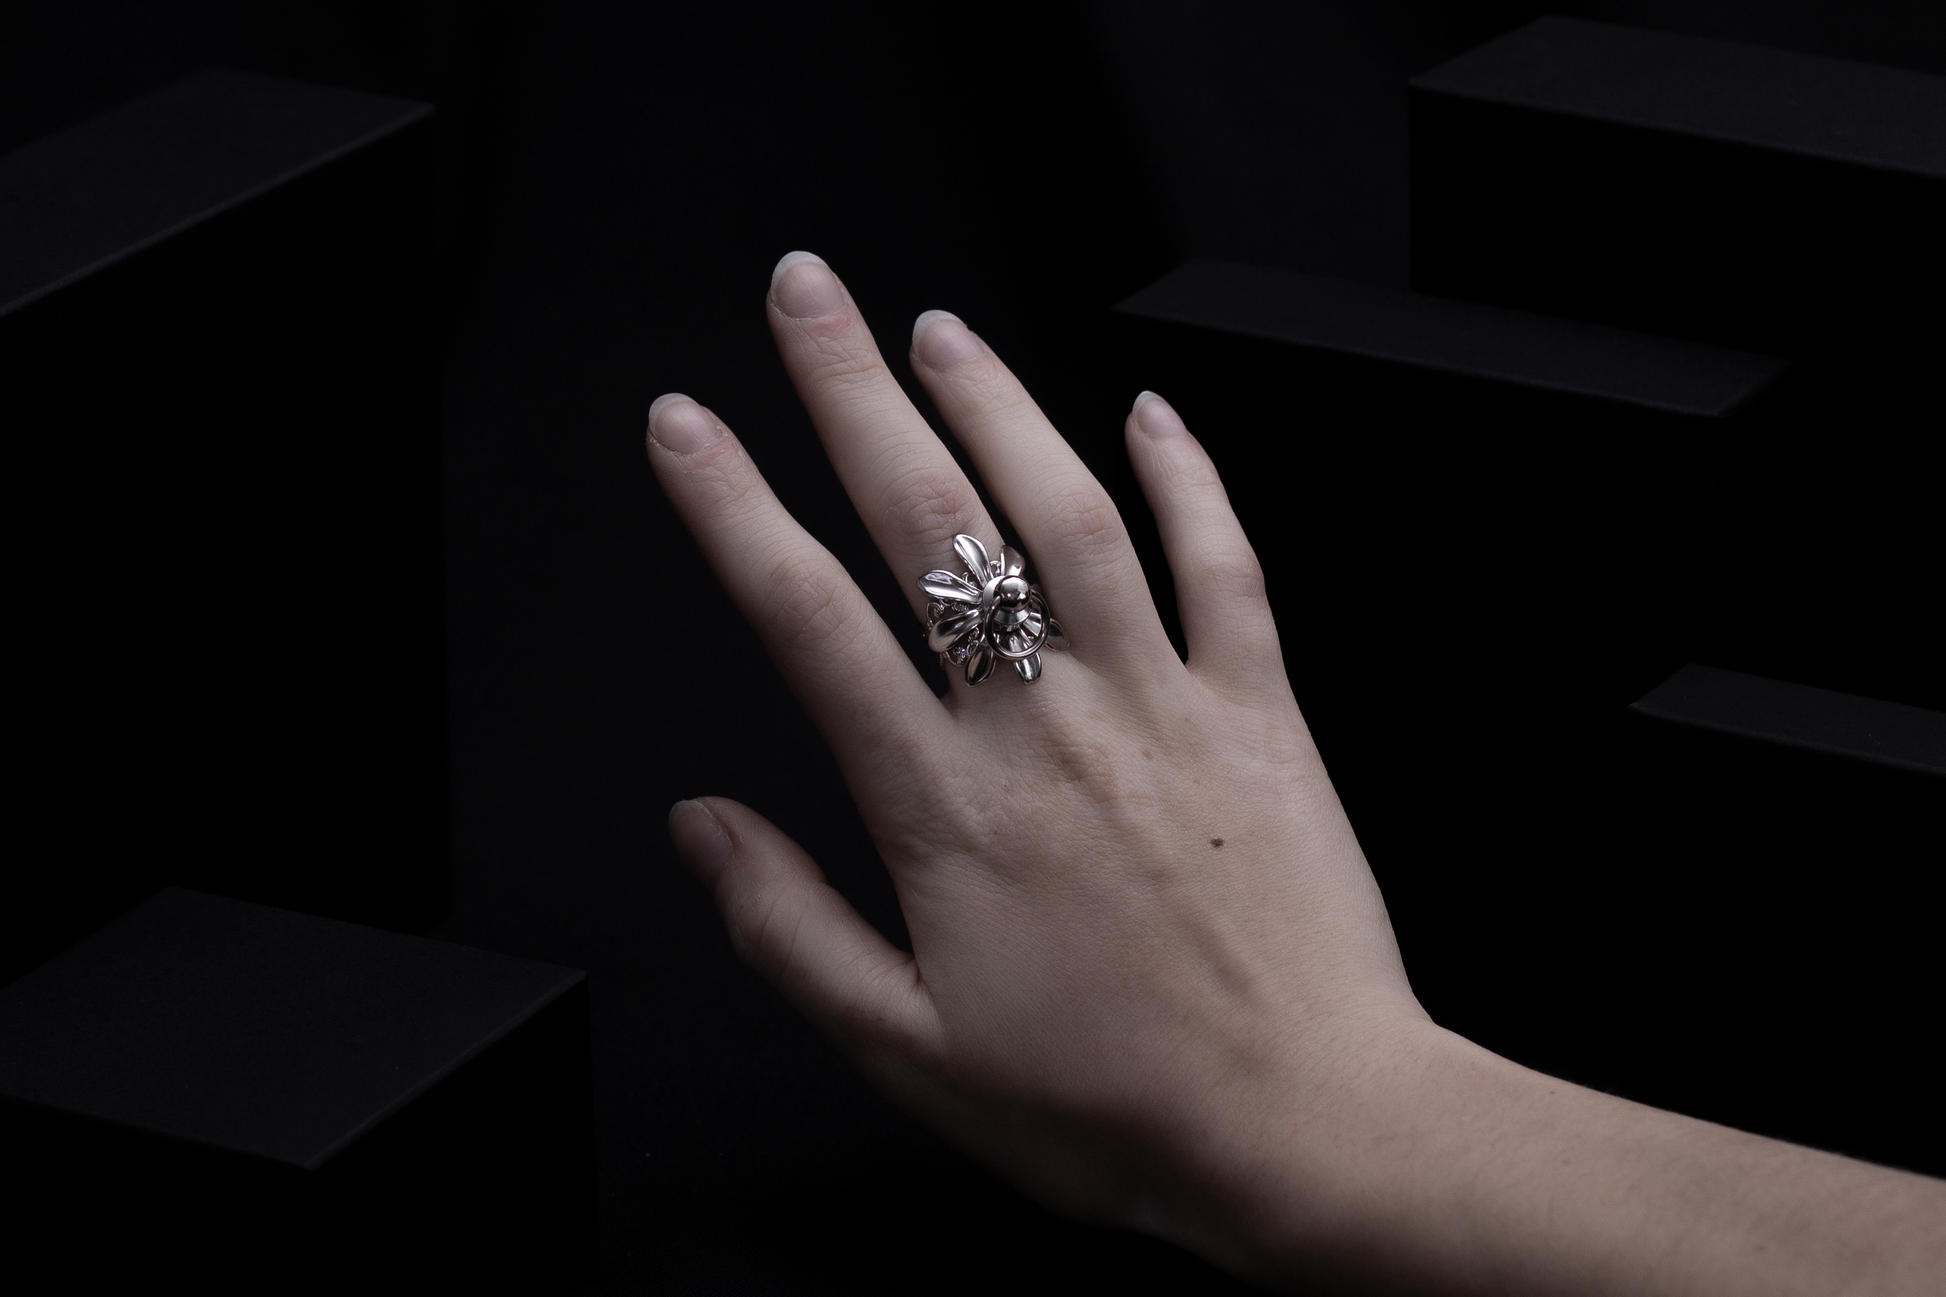 A solitary hand displays a Myril Jewels flower ring, a masterpiece of dark-avantgarde jewelry. The ring's silver sheen and intricate floral design embody the luxurious, gothic aesthetic, a signature of Myril Jewels, catering to those with a penchant for bold, alternative fashion.